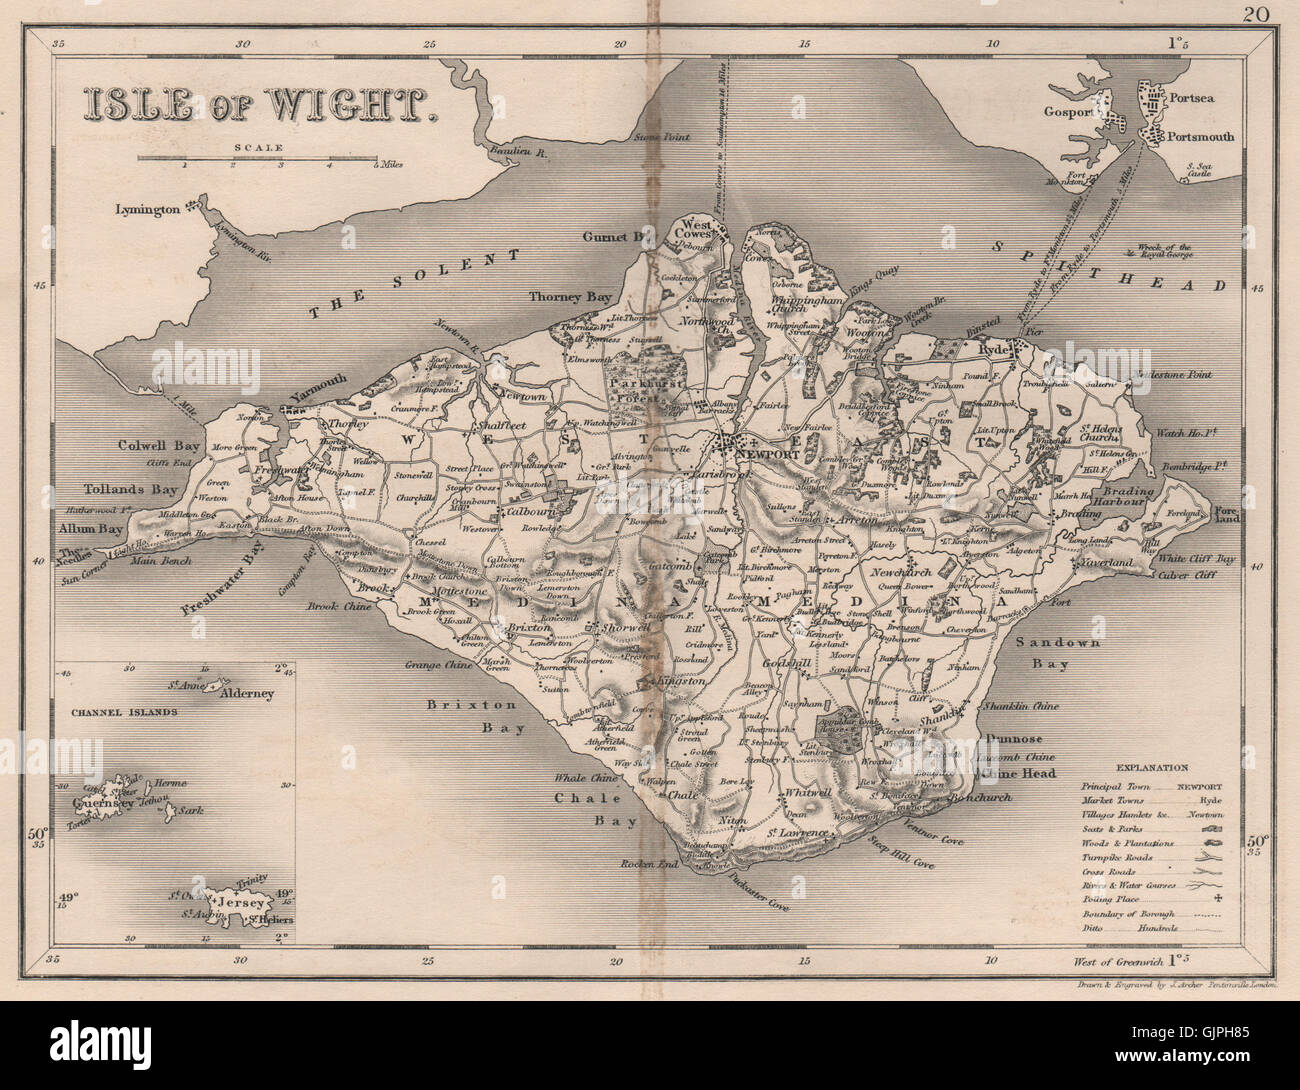 ISLE OF WIGHT map by DUGDALE/ARCHER. Seats polling places, 1845 Stock Photo